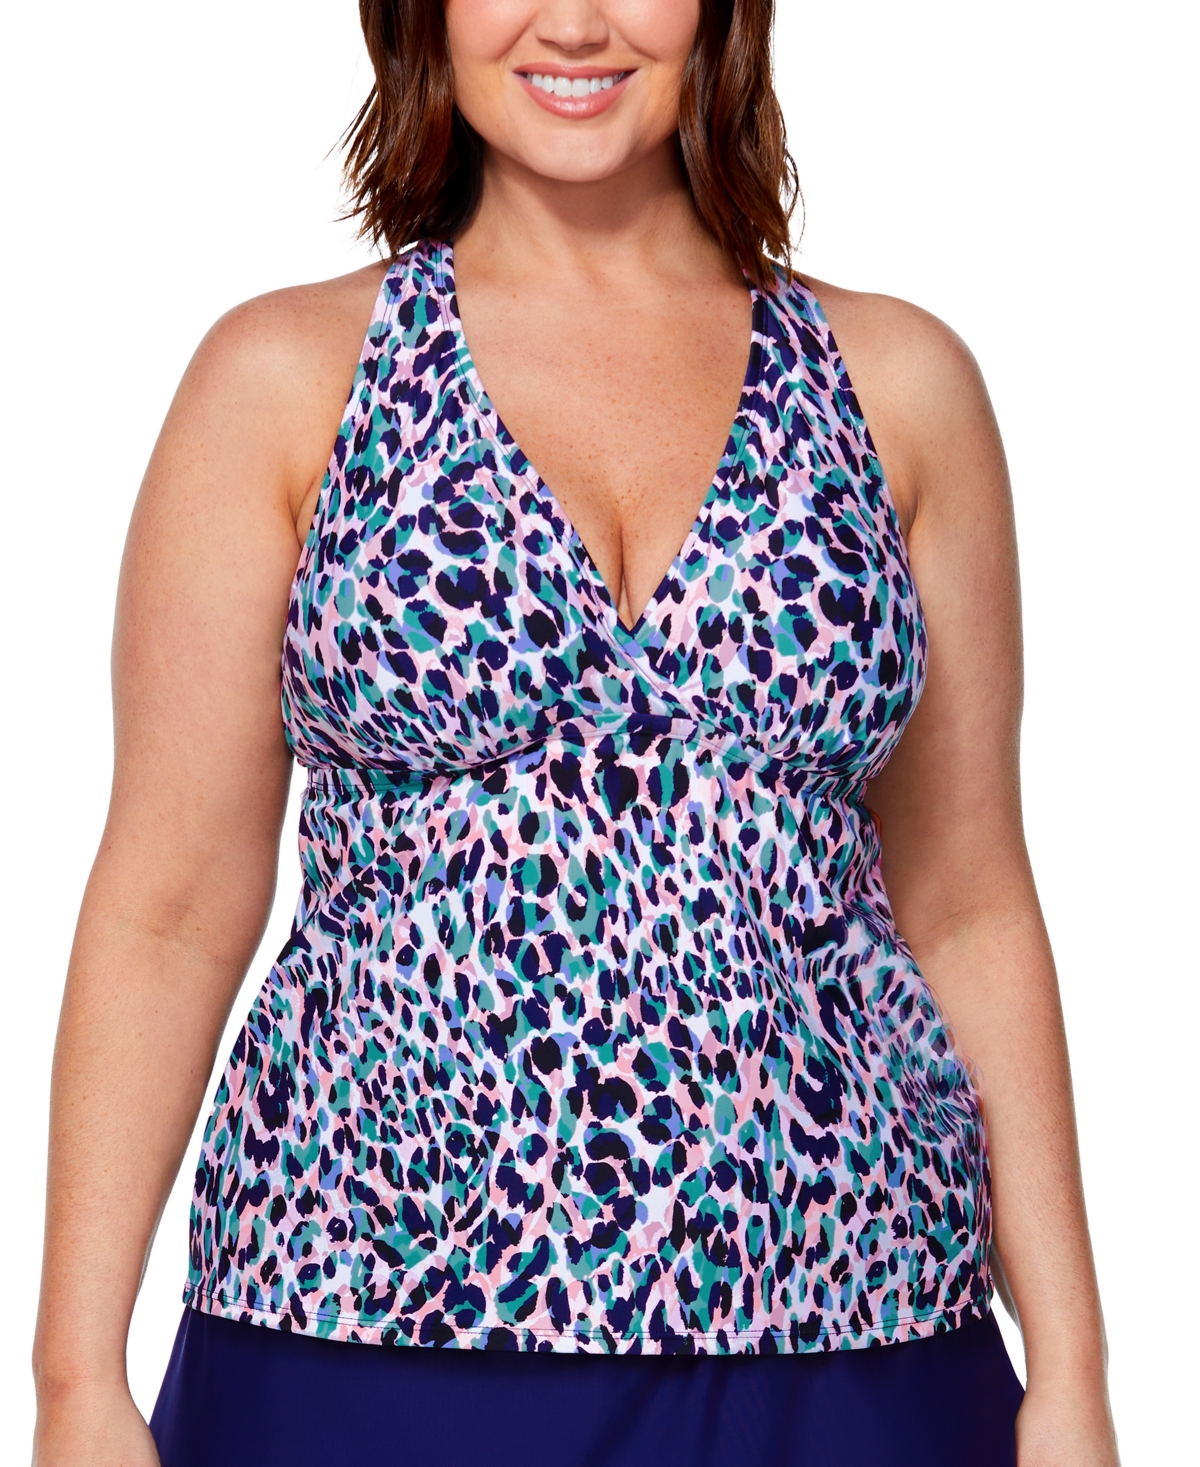 Island Escape Plus Size Printed Tankini Top, Created for Macy's Women's Swimsuit